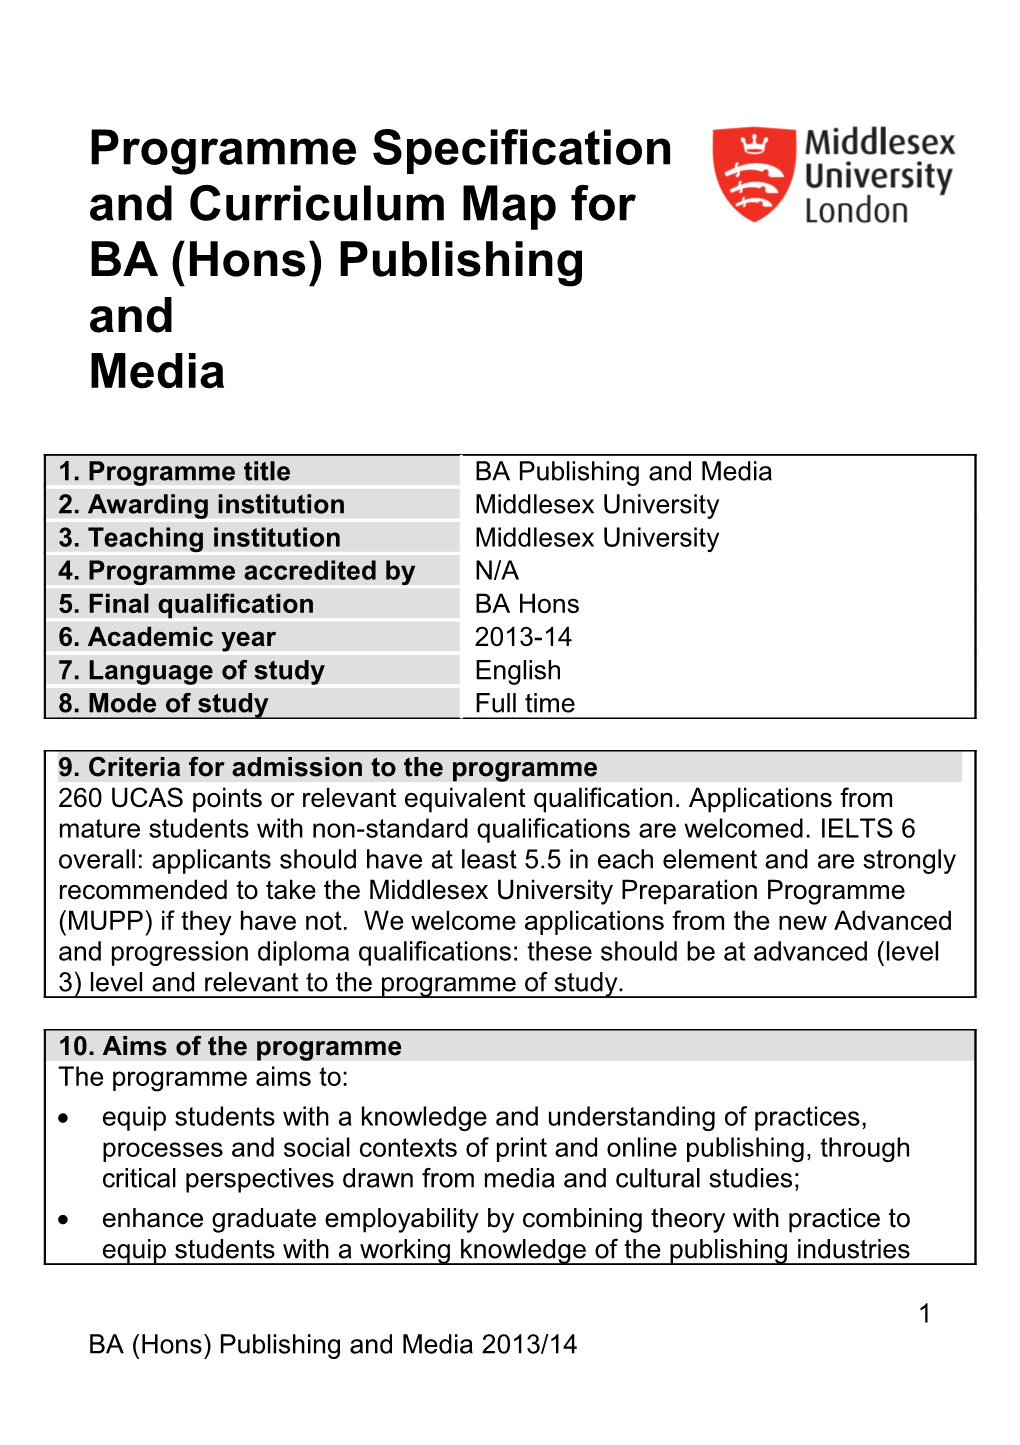 Programme Specification and Curriculum Map for BA (Hons) Publishing And